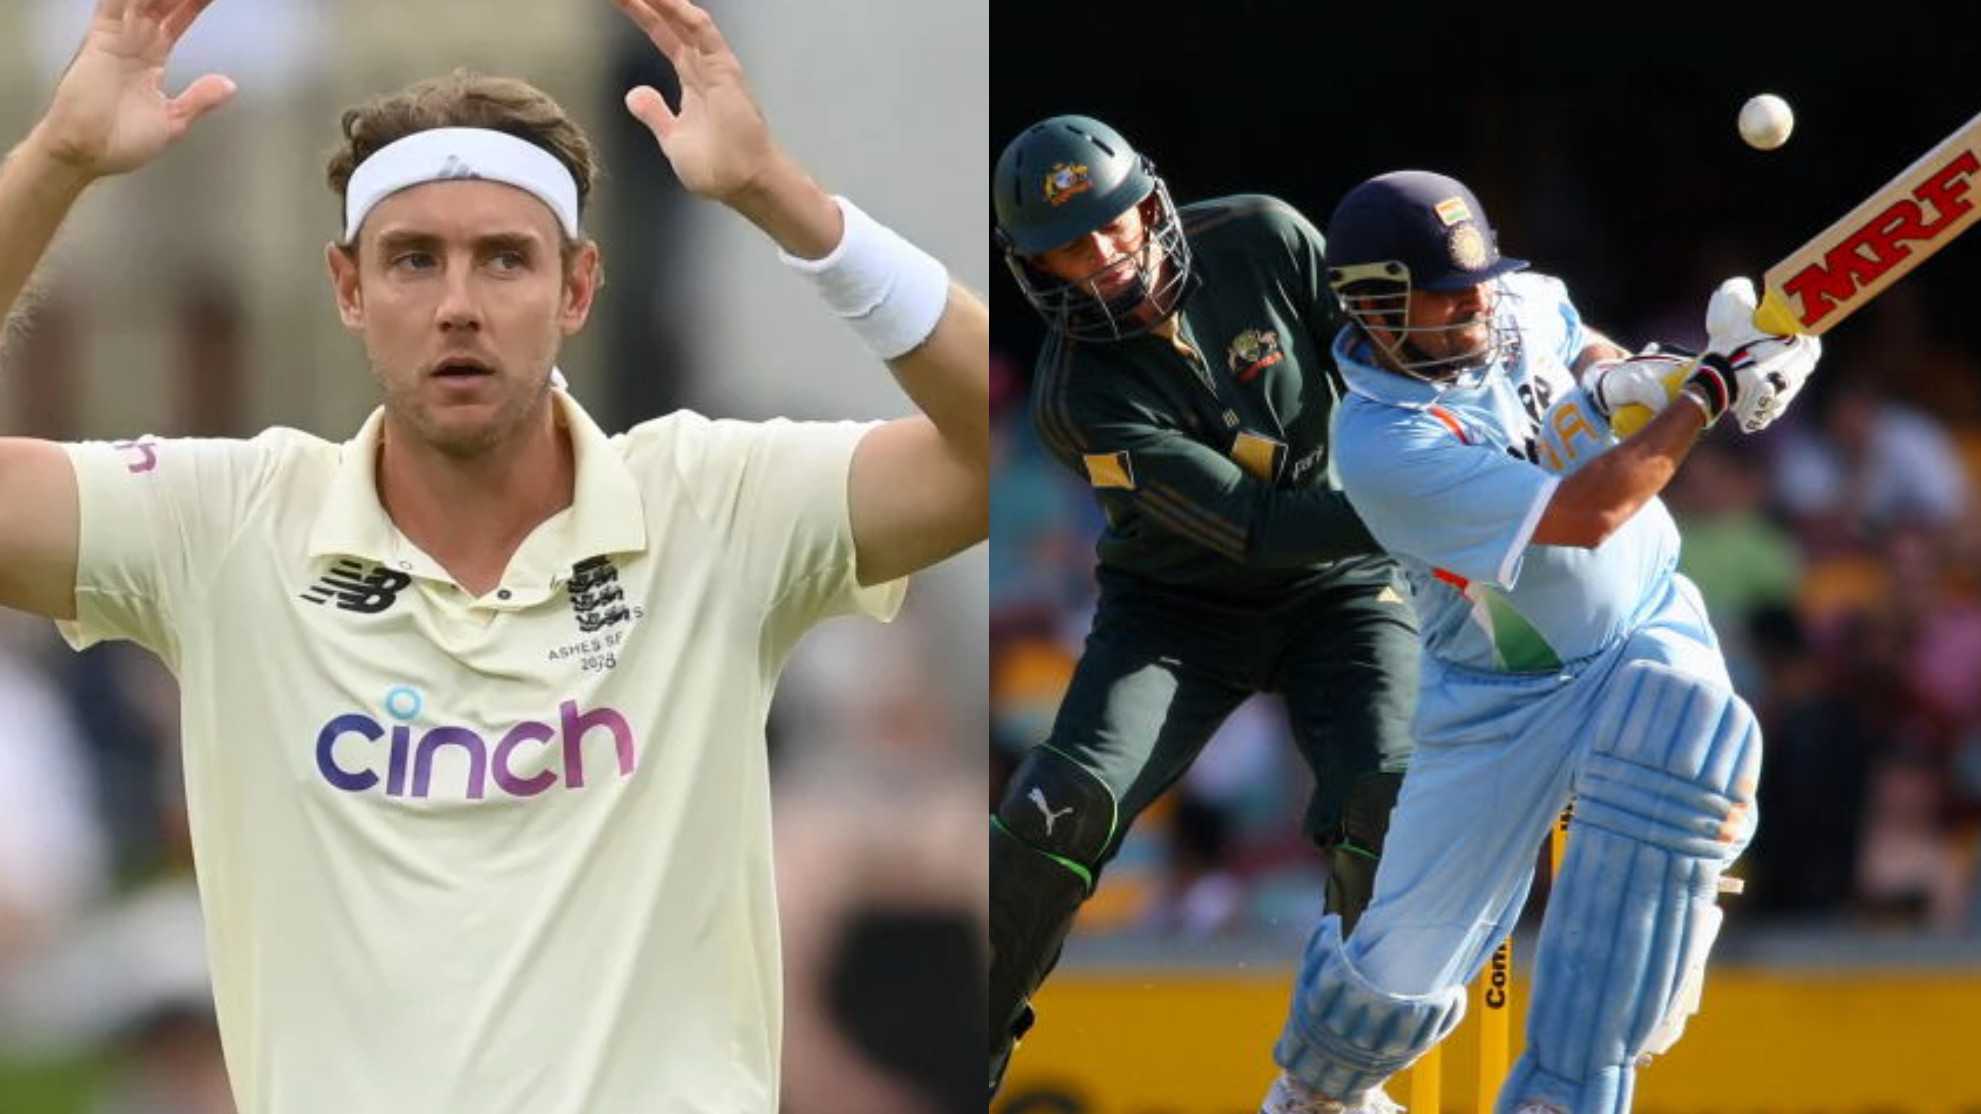 ‘Sachin was classed lucky’- Stuart Broad cites Tendulkar incident and defends himself from criticism for not walking